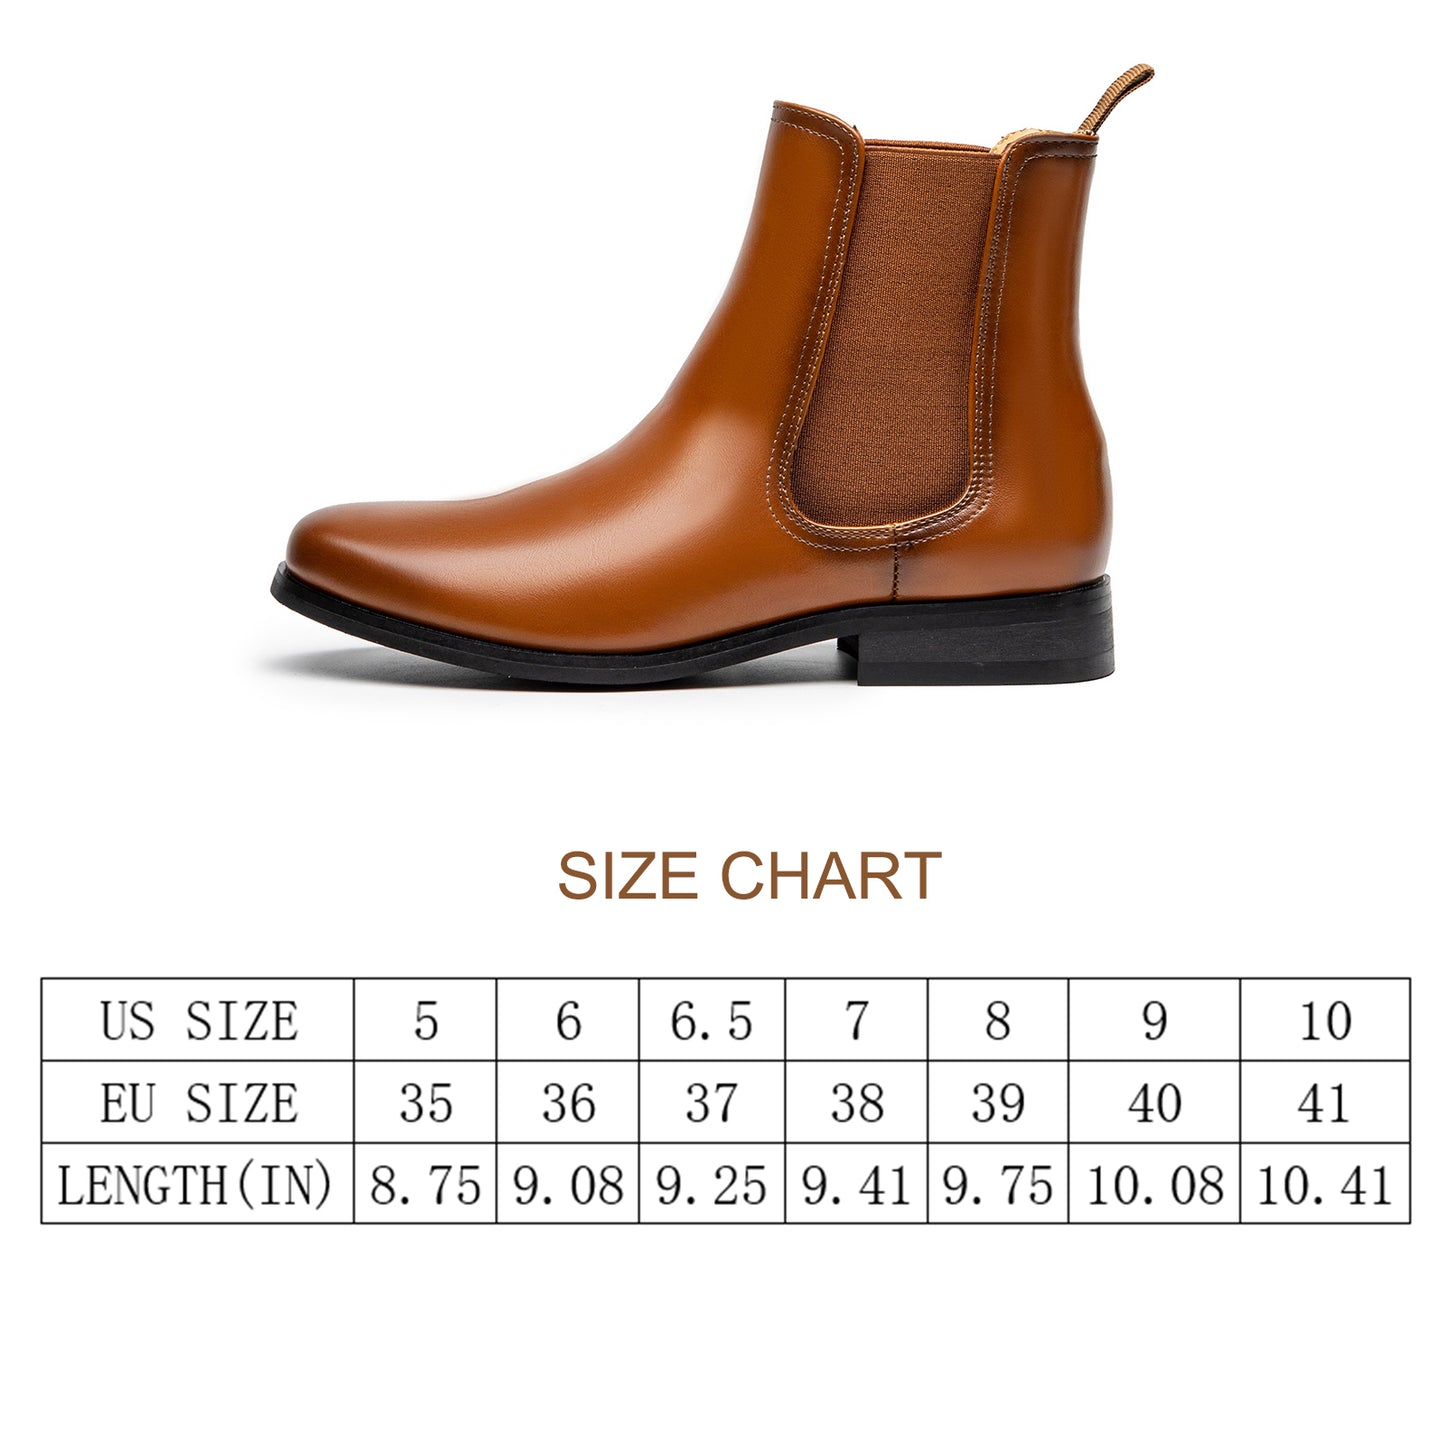 Women's Chelsea Boots Slip-on Low Heeled Booties for Women Casual Comfortable Ankle Booties Shoes